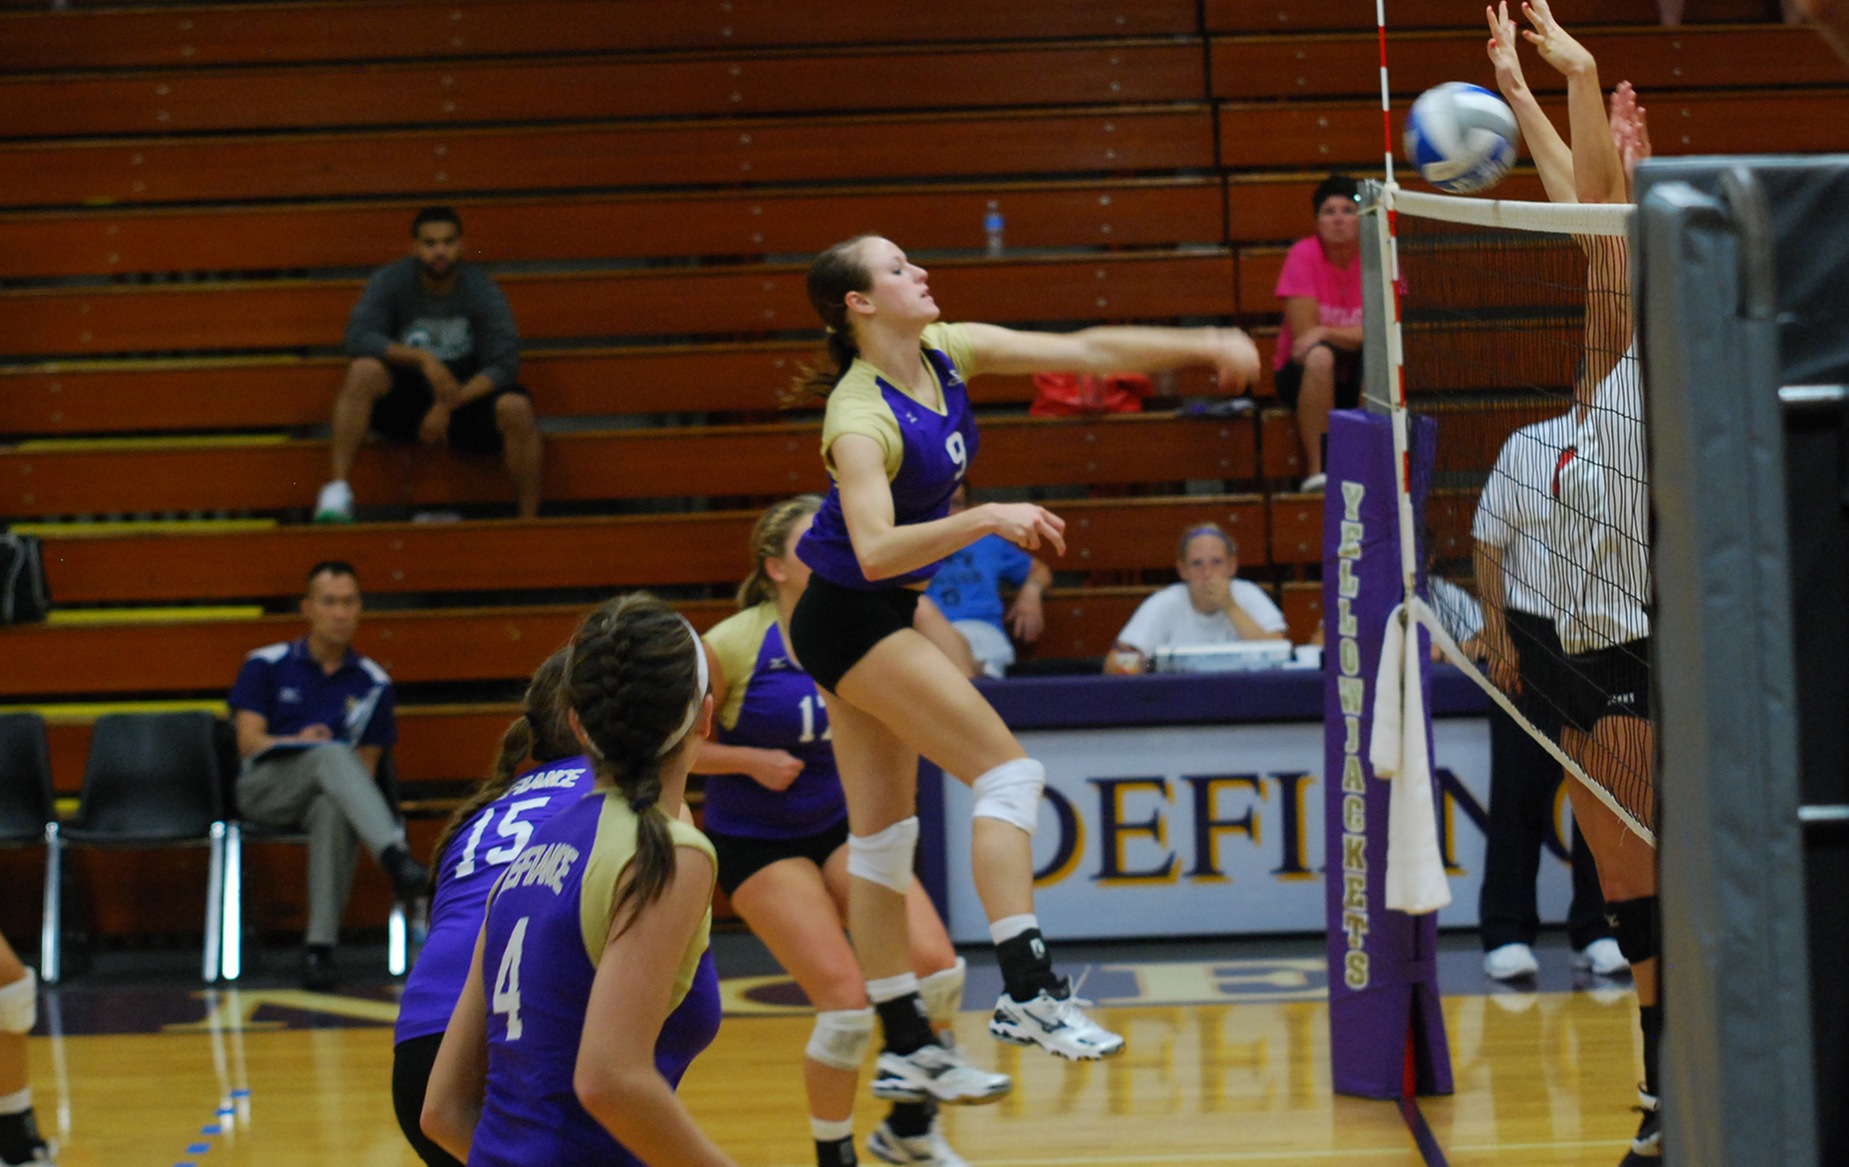 Yellow Jackets Defeat HCAC Foes in First Night of Season